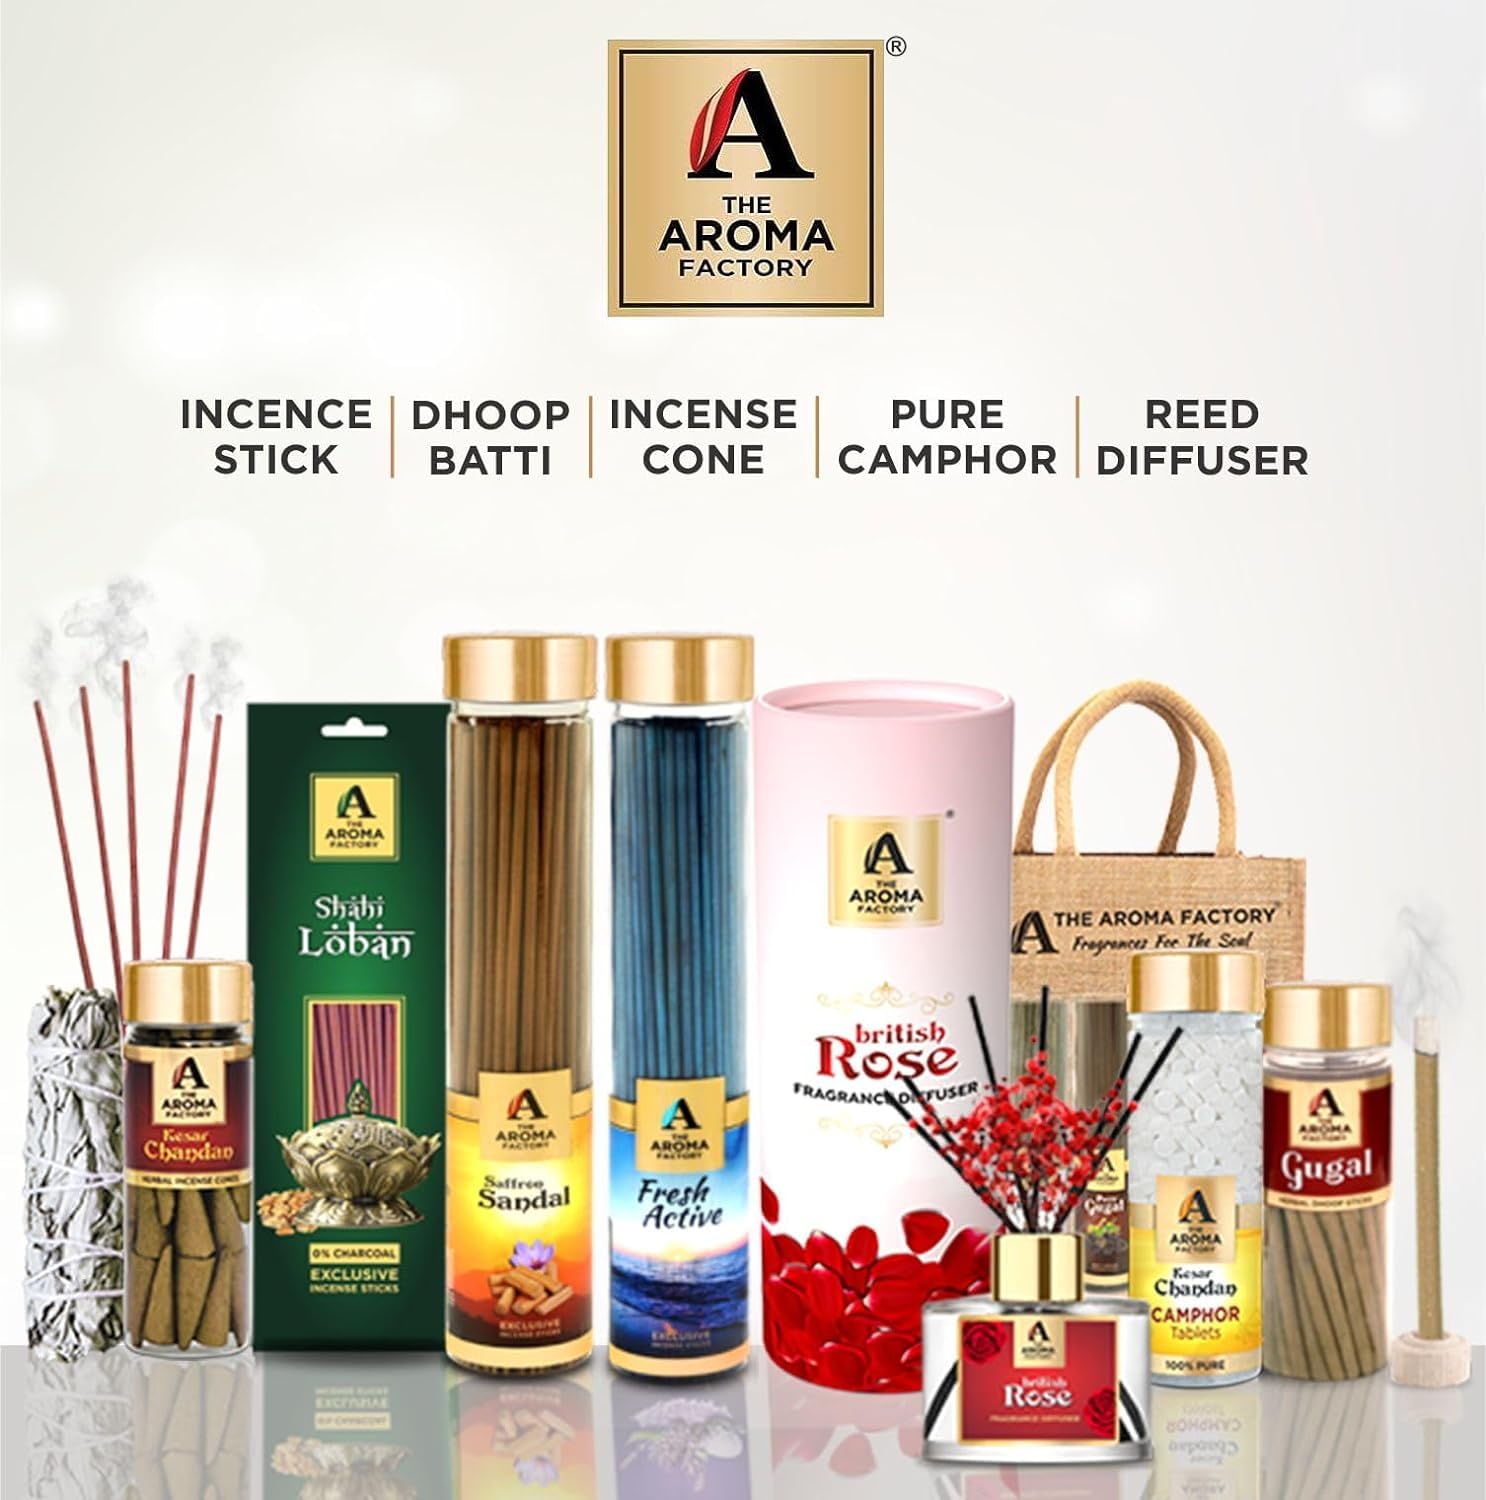 The Aroma Factory Happy Birthday MASI/Mausi Gift with Card (25 Swad Candy, Strawberry Agarbatti Bottle, Mogra Cone) in Jute Bag